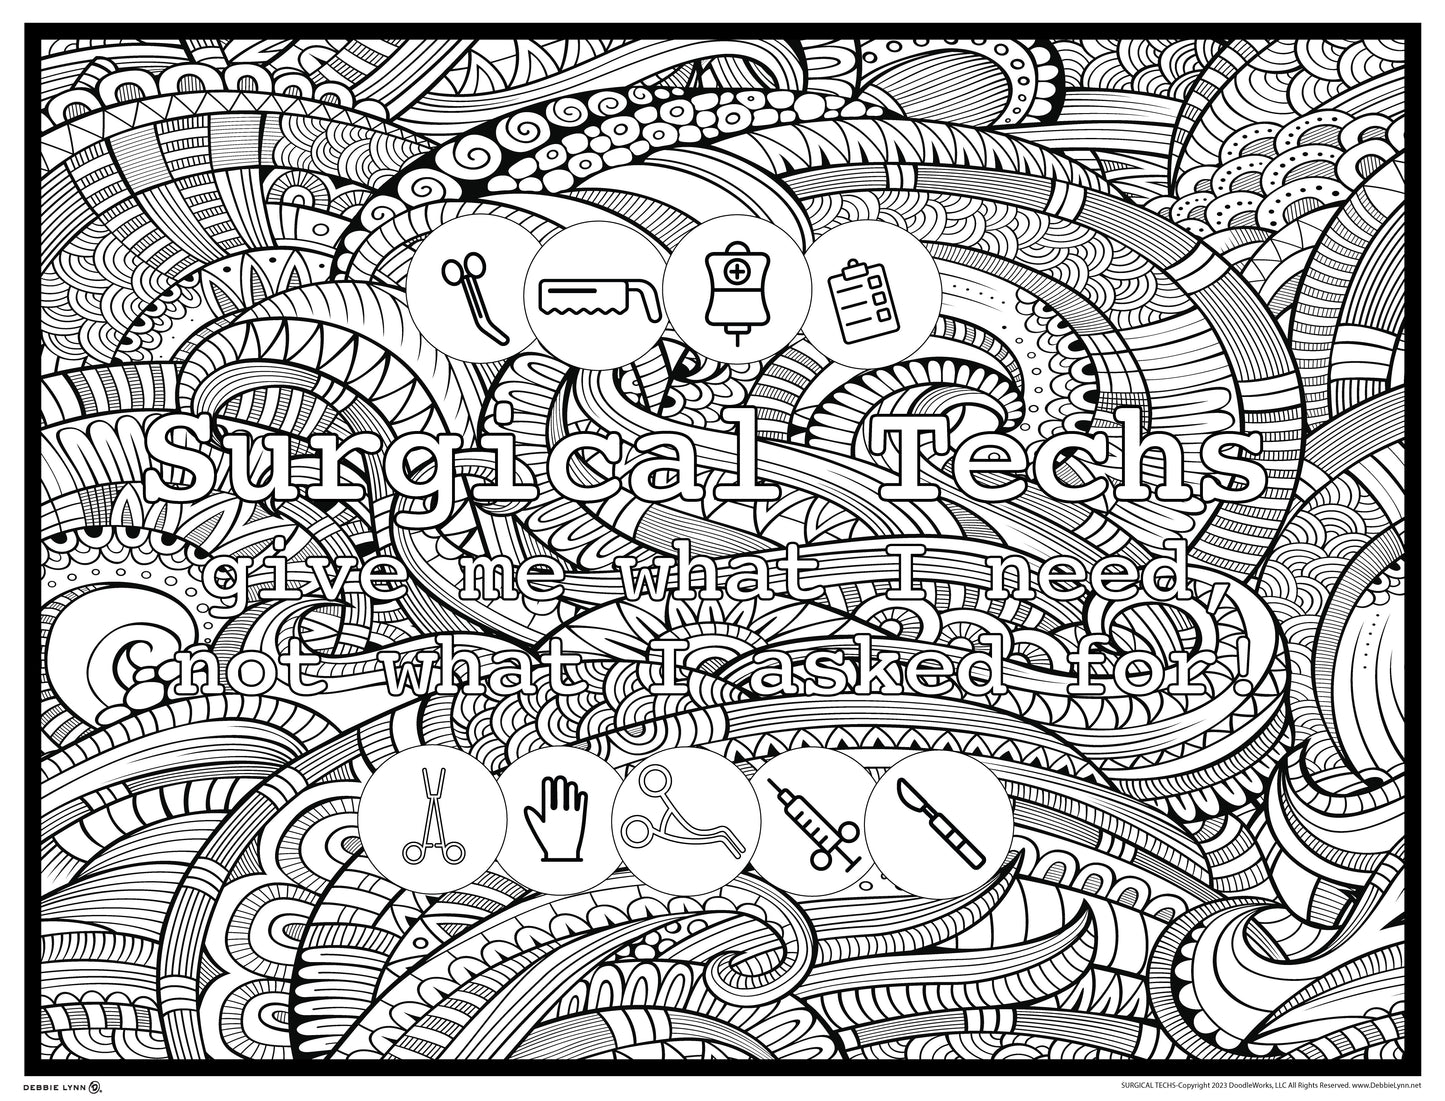 Surgical Techs Giant Coloring Poster